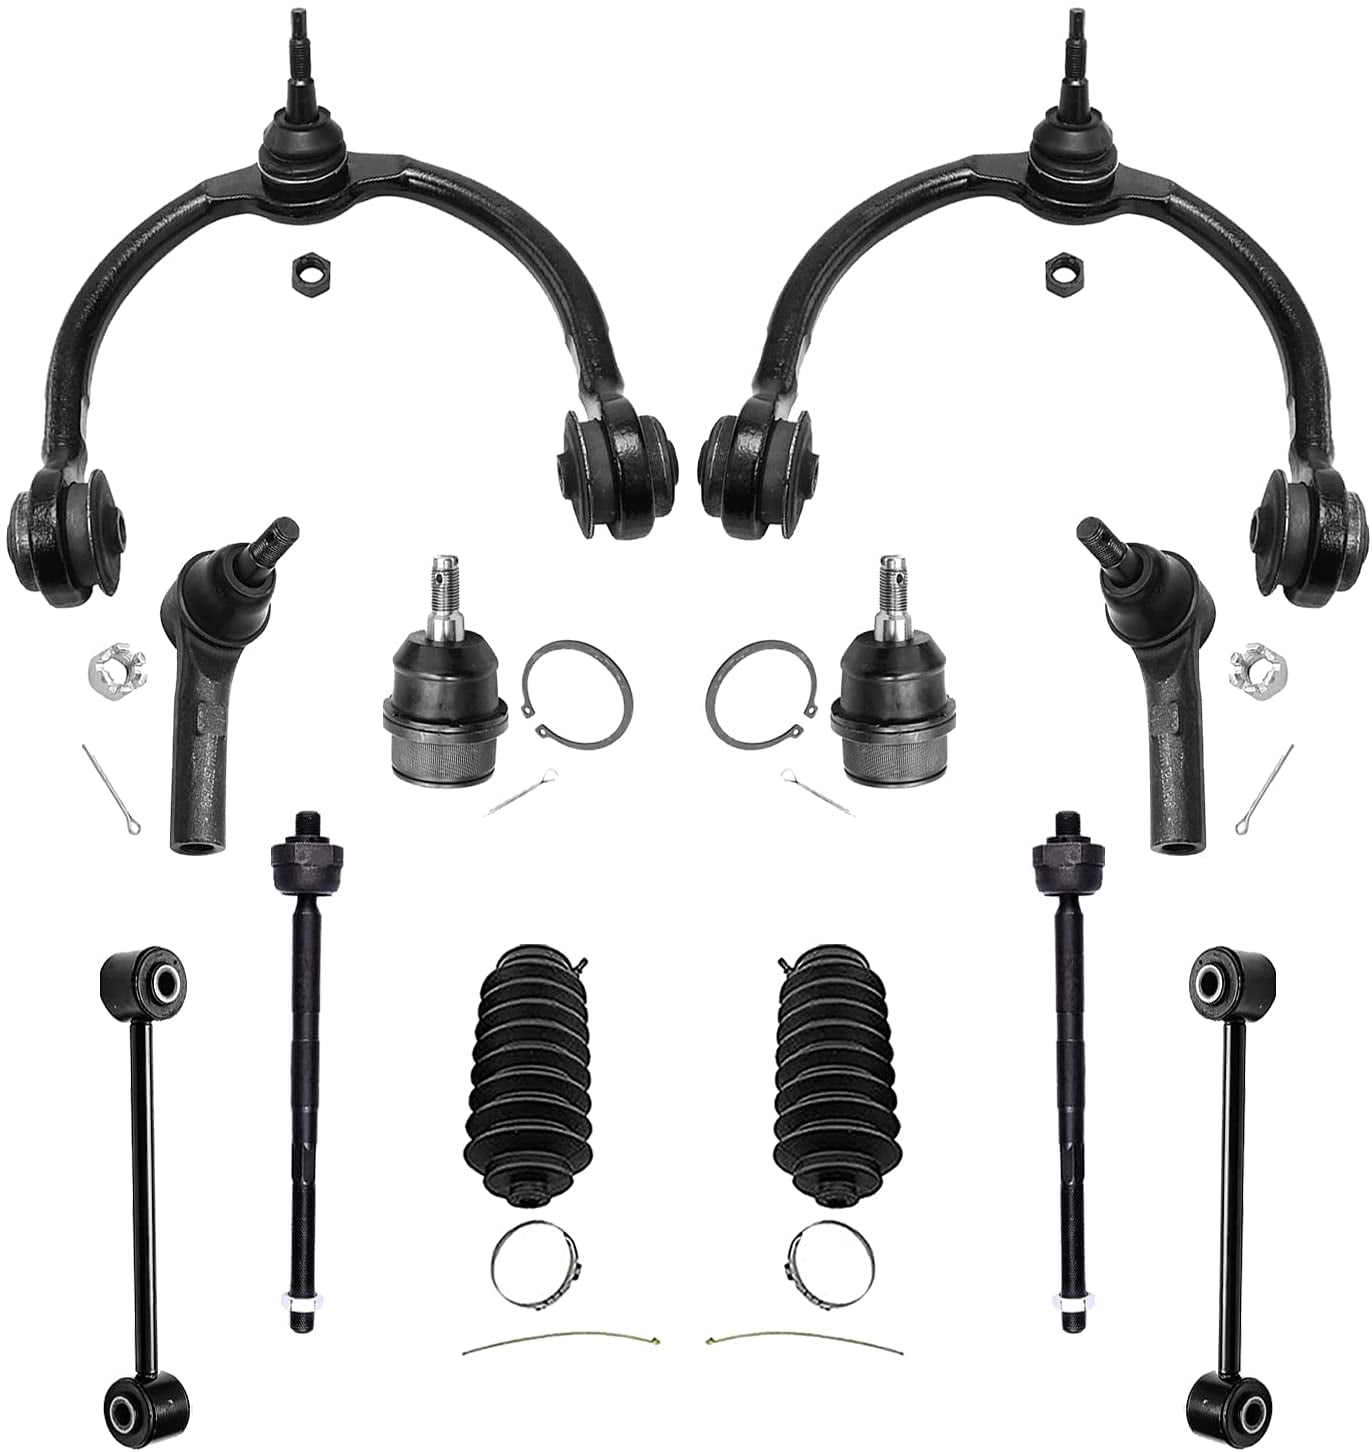 Detroit Axle Front 12pc Suspension Kit for Jeep Grand Cherokee Commander  2005 2006 2007 2008 2009 2010, Upper Control Arms Lower Ball Joints Sway  Bars Tie Rods Boots Replacement